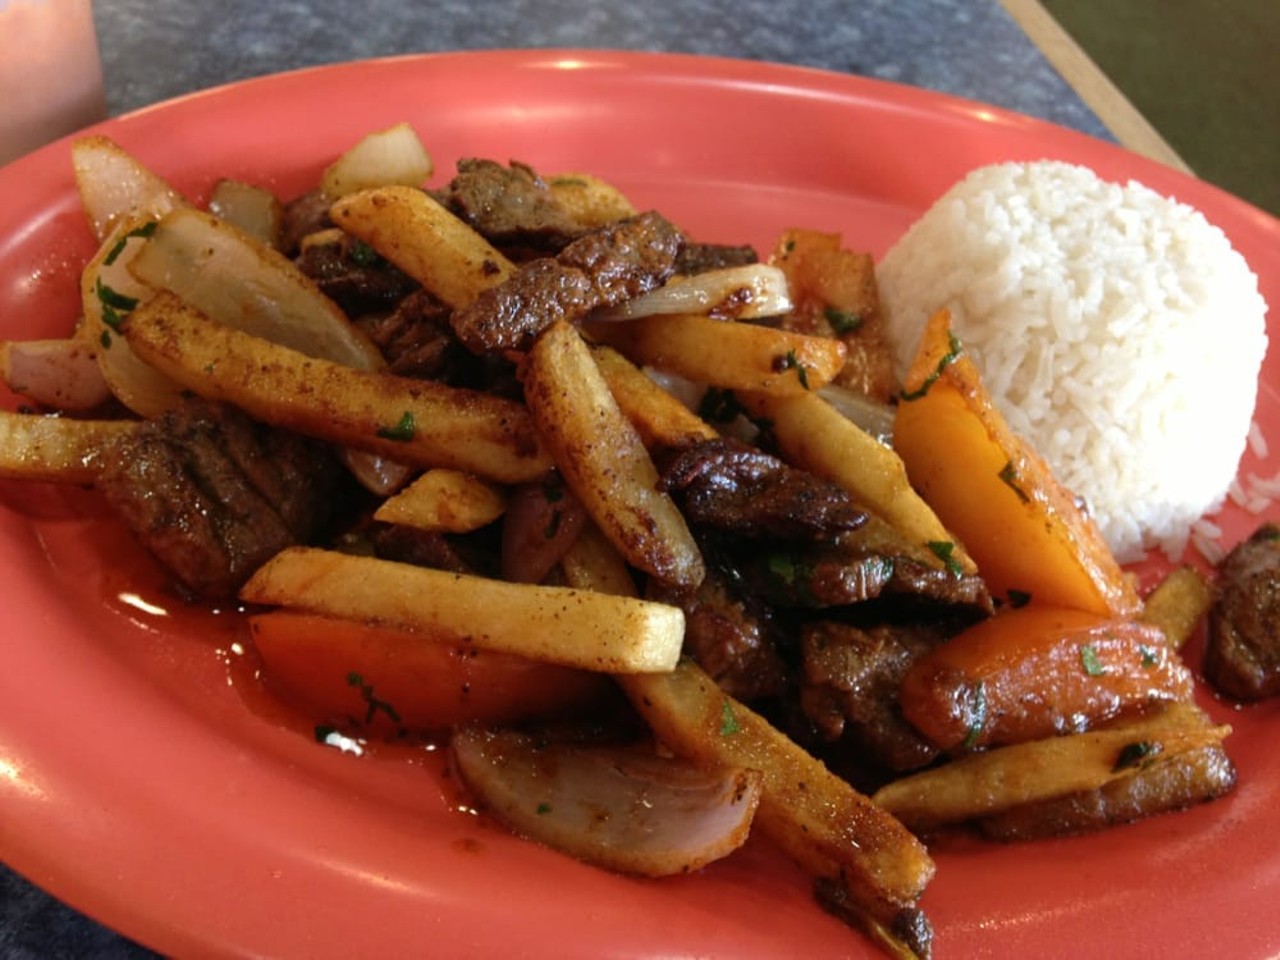 Rocotos Grill
10555 Culebra Road, (210) 521-4367, rocotosgrill.com
This Latin-American cafe specializes in Peruvian bites and charbroiled chicken, so your taste buds will be satisfied. For authentic bites and a taste of Peru, choose from a variety of piqueo, chicharron, and more.
Photo via Yelp / Alfredo M.